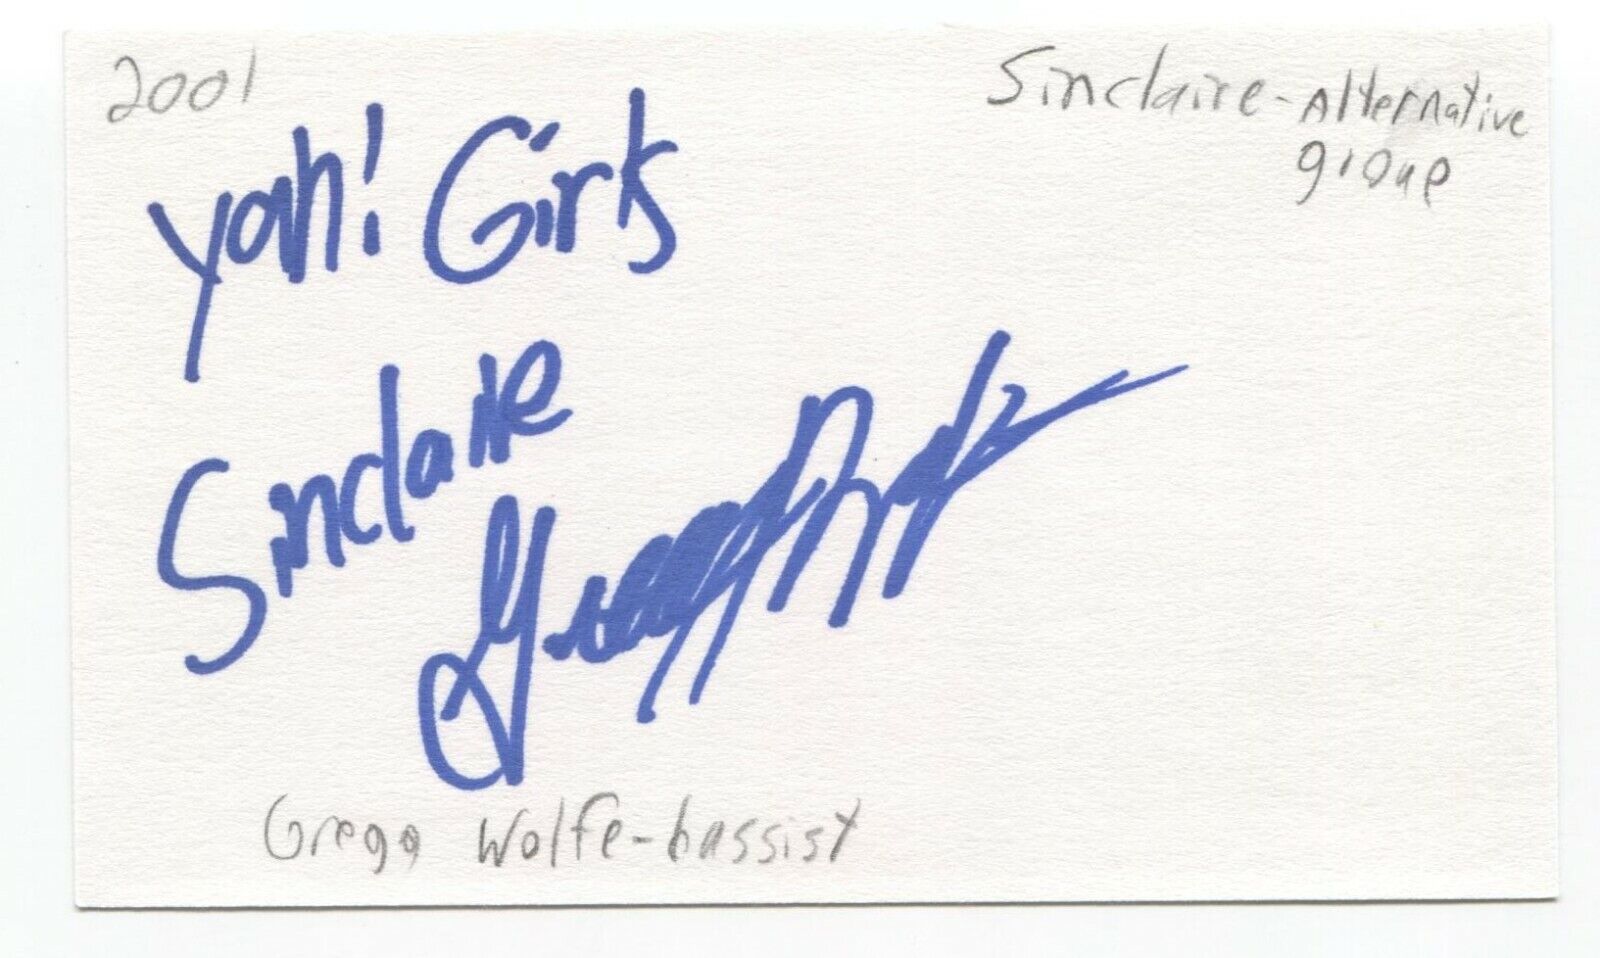 Sinclaire - Grego Wolfe Signed 3x5 Index Card Autographed Signature Band